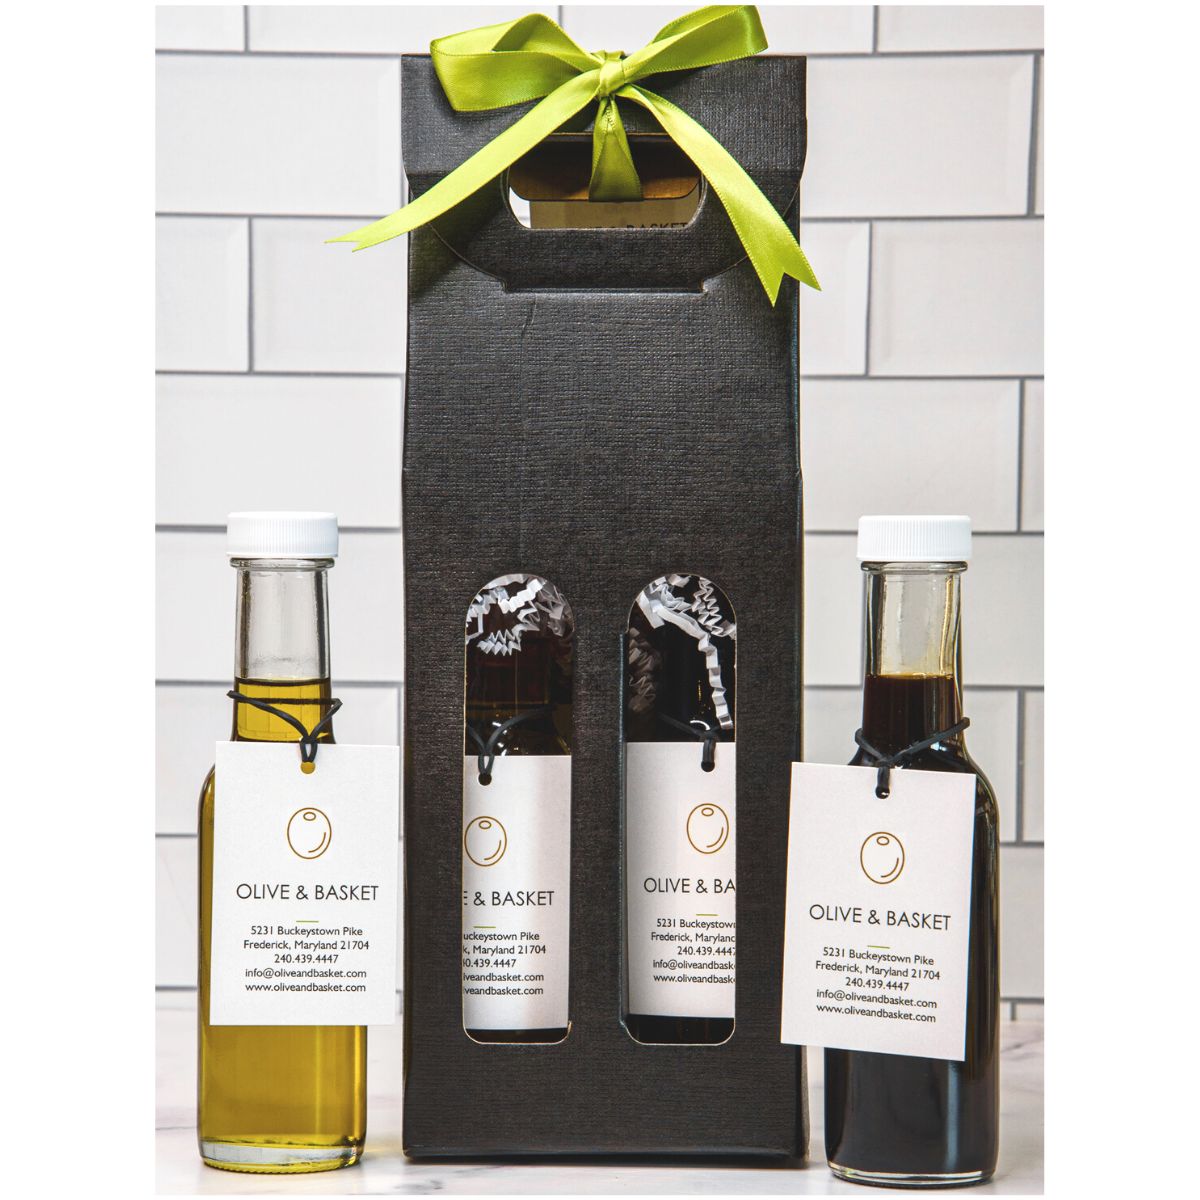 Classic Italian Duo Gift Set-Traditional Balsamic Vinegar and Tuscan Herb Olive Oil in a Gift Box